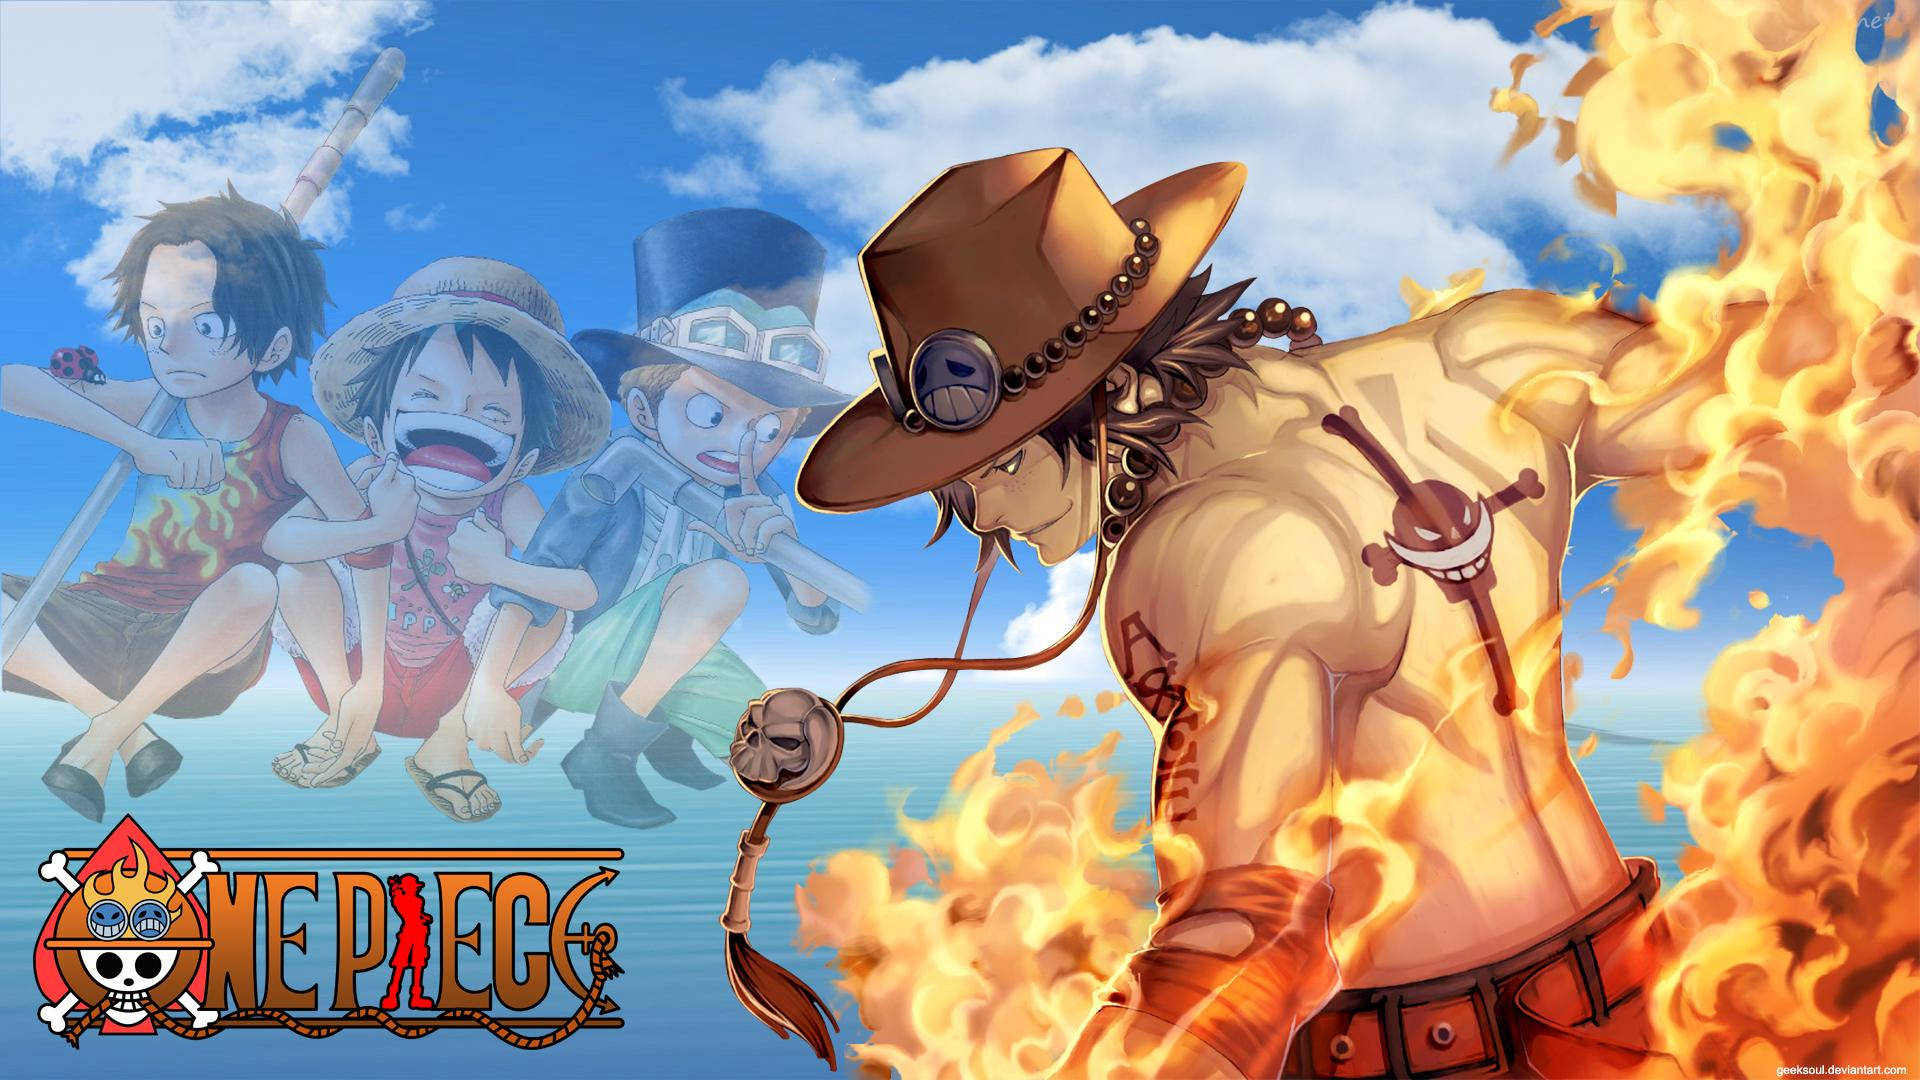 Onepiece Ace Ozean Poster Wallpaper